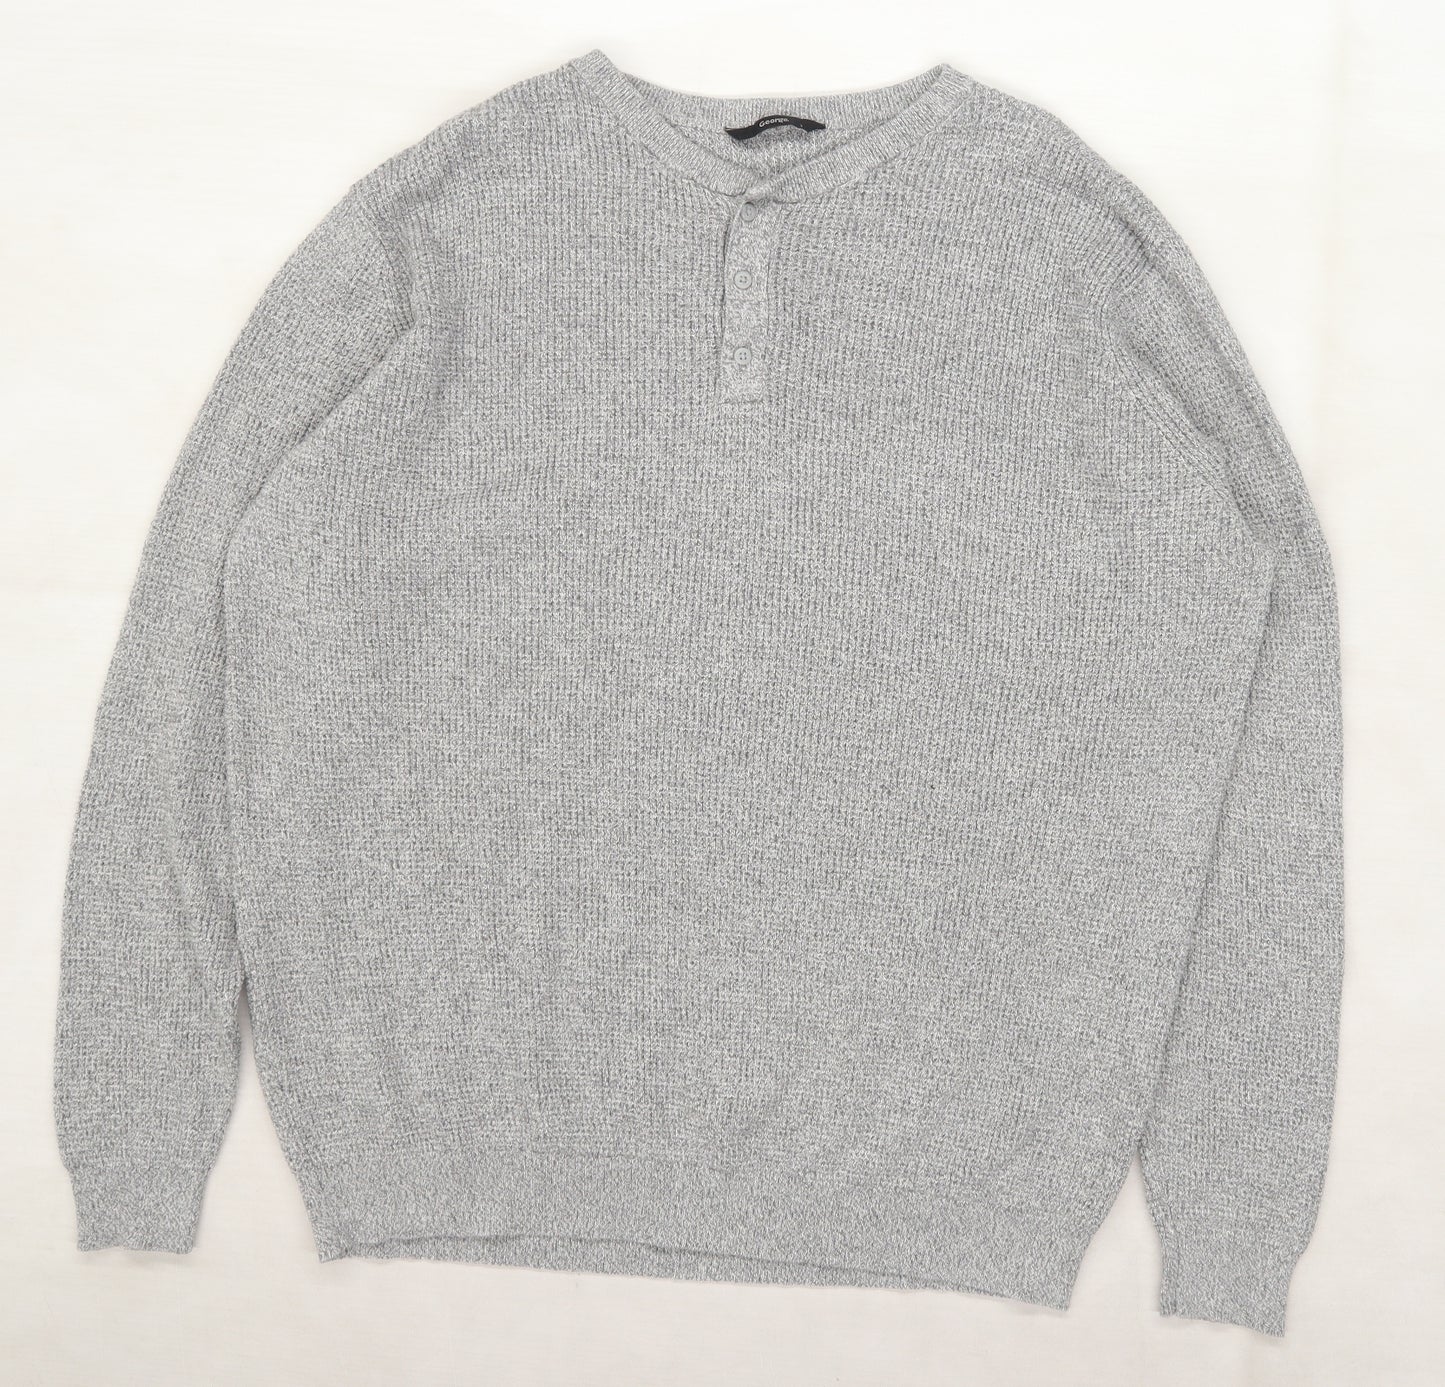 George Mens Grey  Knit Pullover Jumper Size XL